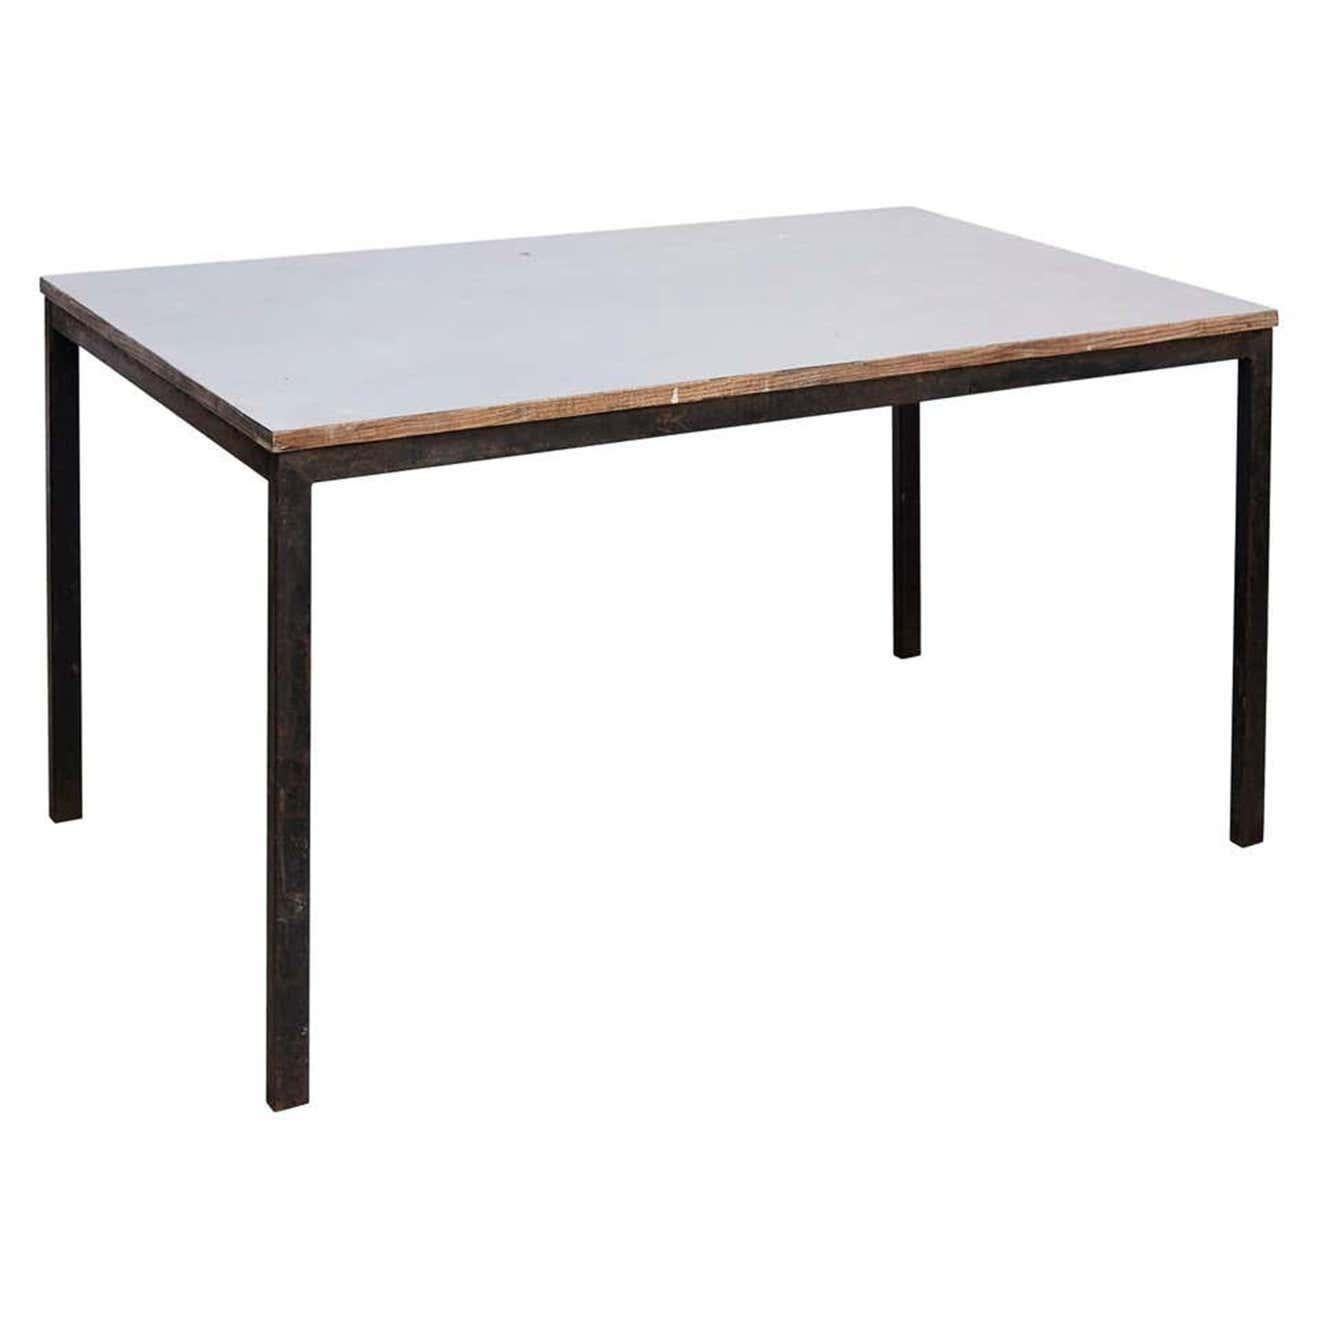 Charlotte Perriand, Mid-Century Modern, Wood Metal Cansado Table, circa 1950 For Sale 9